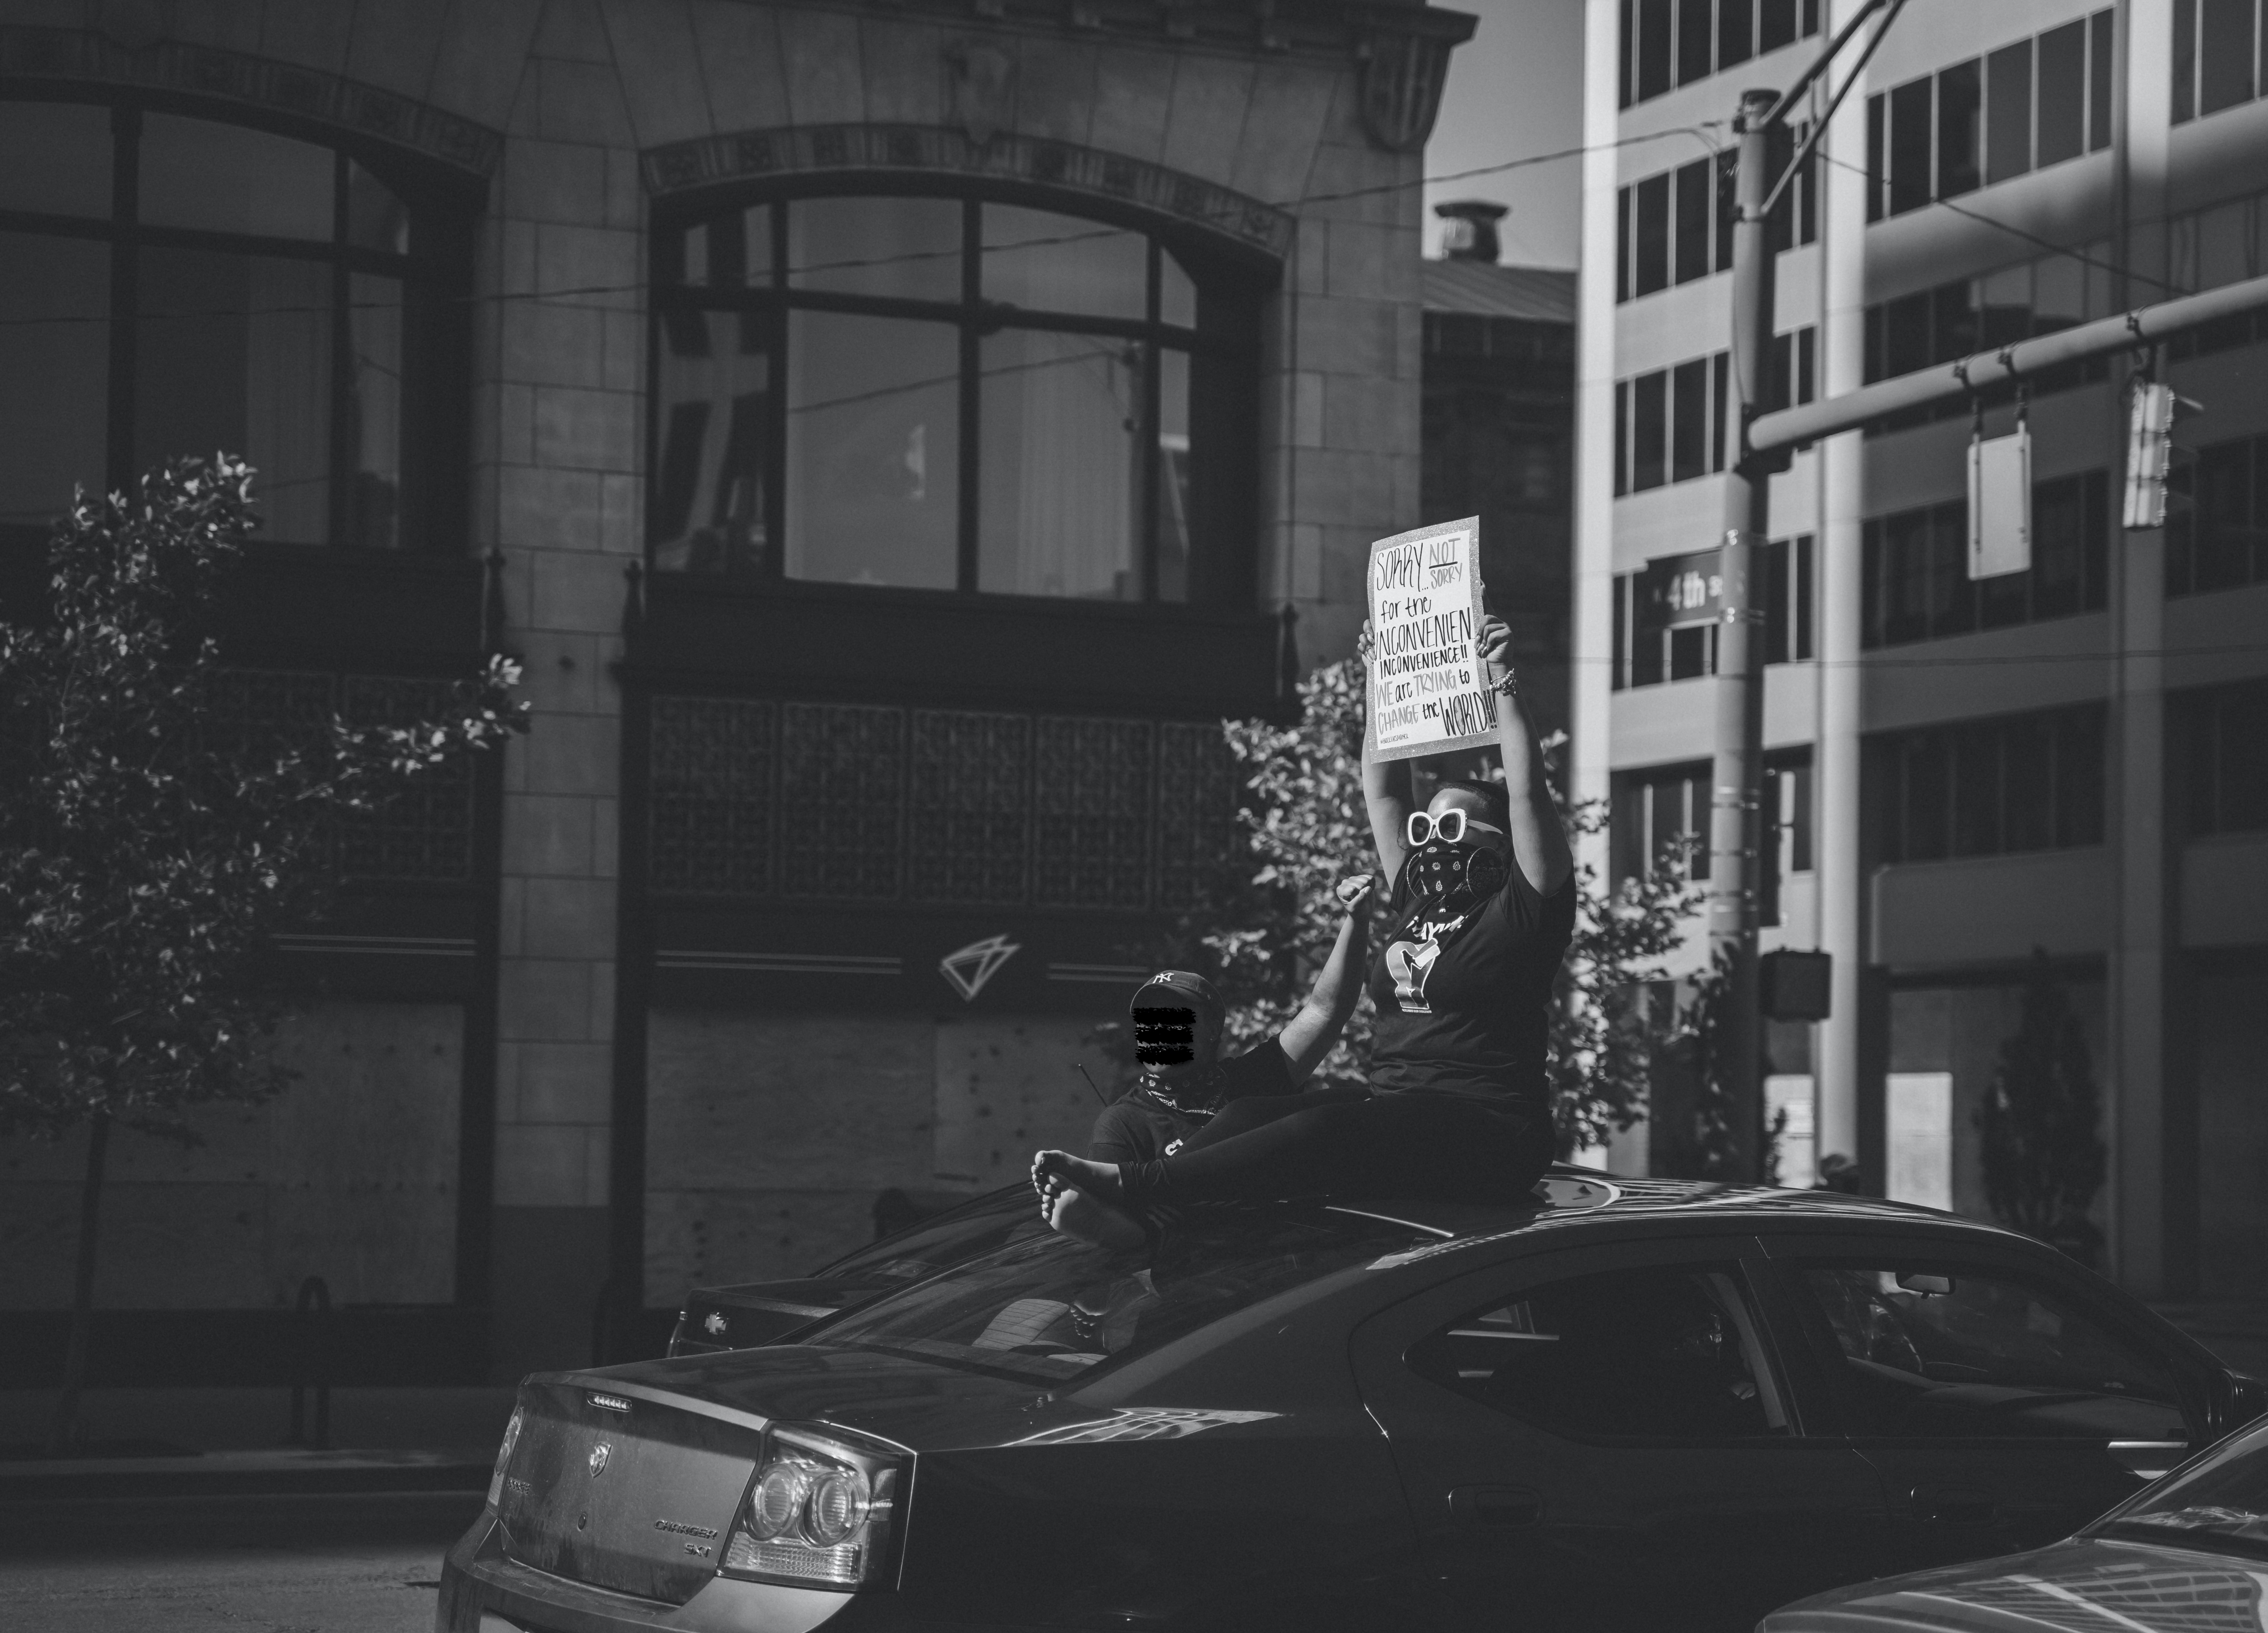 A black and white photograph. The foreground focuses on a BLM protester sitting on a car in the bottom right thirds of the image holding a sign that reads "Sorry, not sorry for the inconvenient inconvenience!! WE are TRYING to CHANGE the WORLD!" A second figure stands to the side of the car farthest from the viewer and raises a closed fist. The background shows buildings and stop lights.